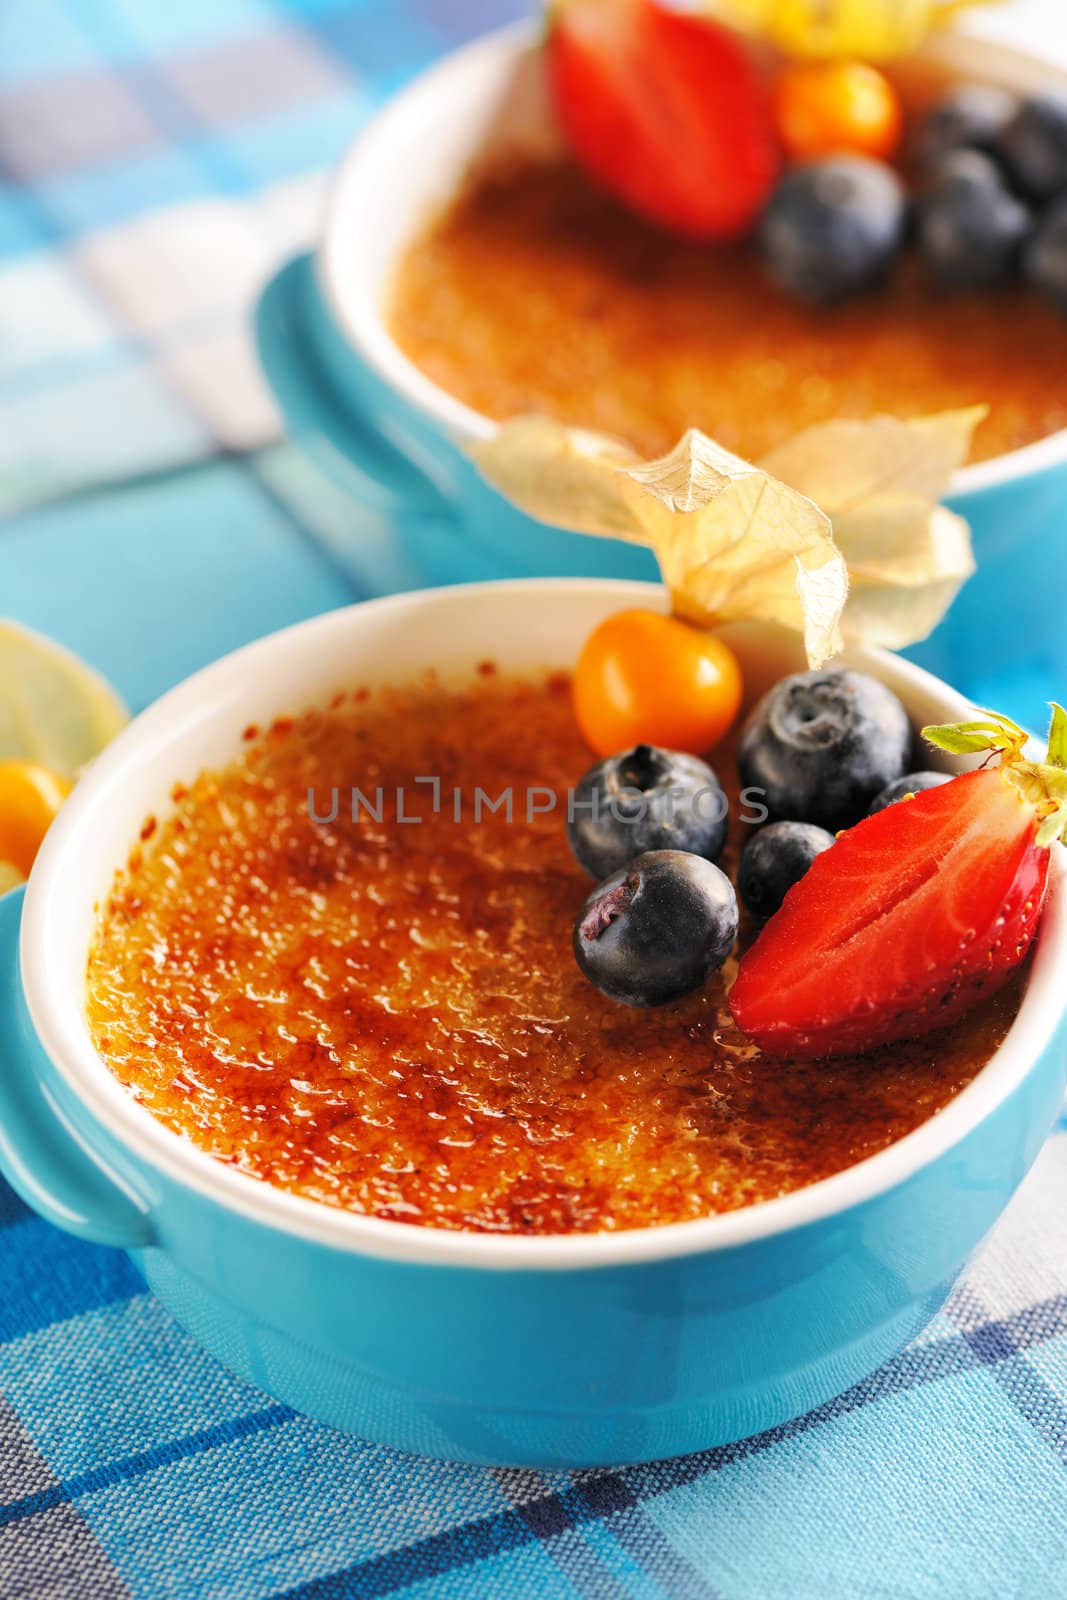 Creme brulee (cream brulee, burnt cream) with fruits and berries